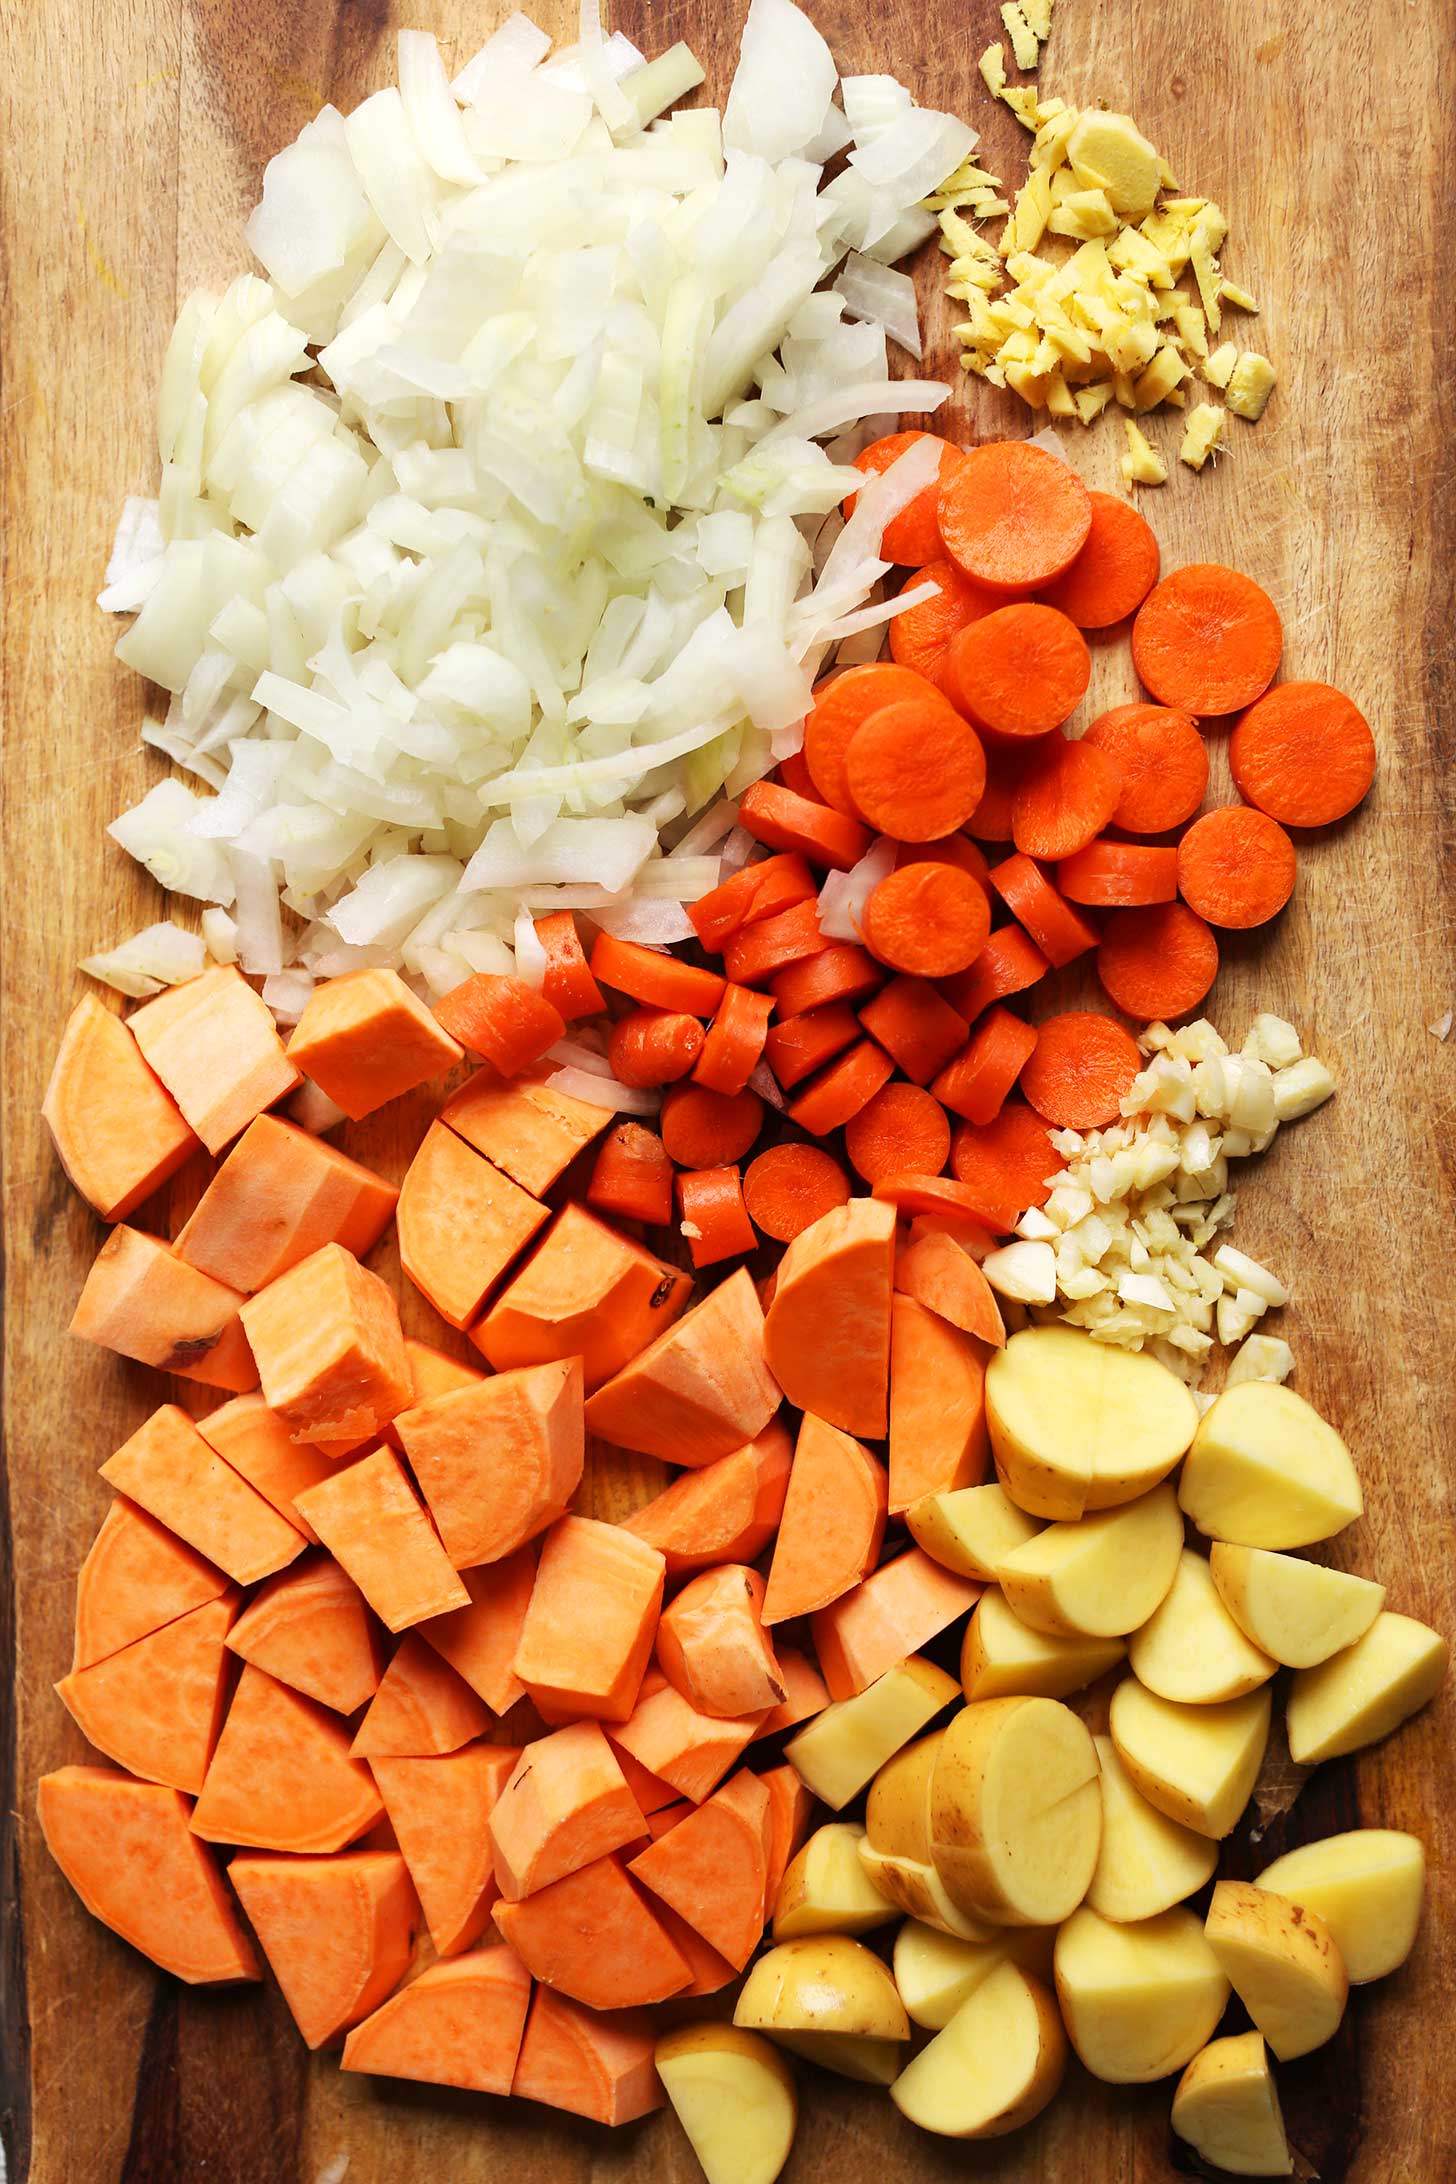 Wood cutting board with onions, carrots, garlic, ginger, sweet potatoes, and potatoes for making healthy gluten-free vegan soup